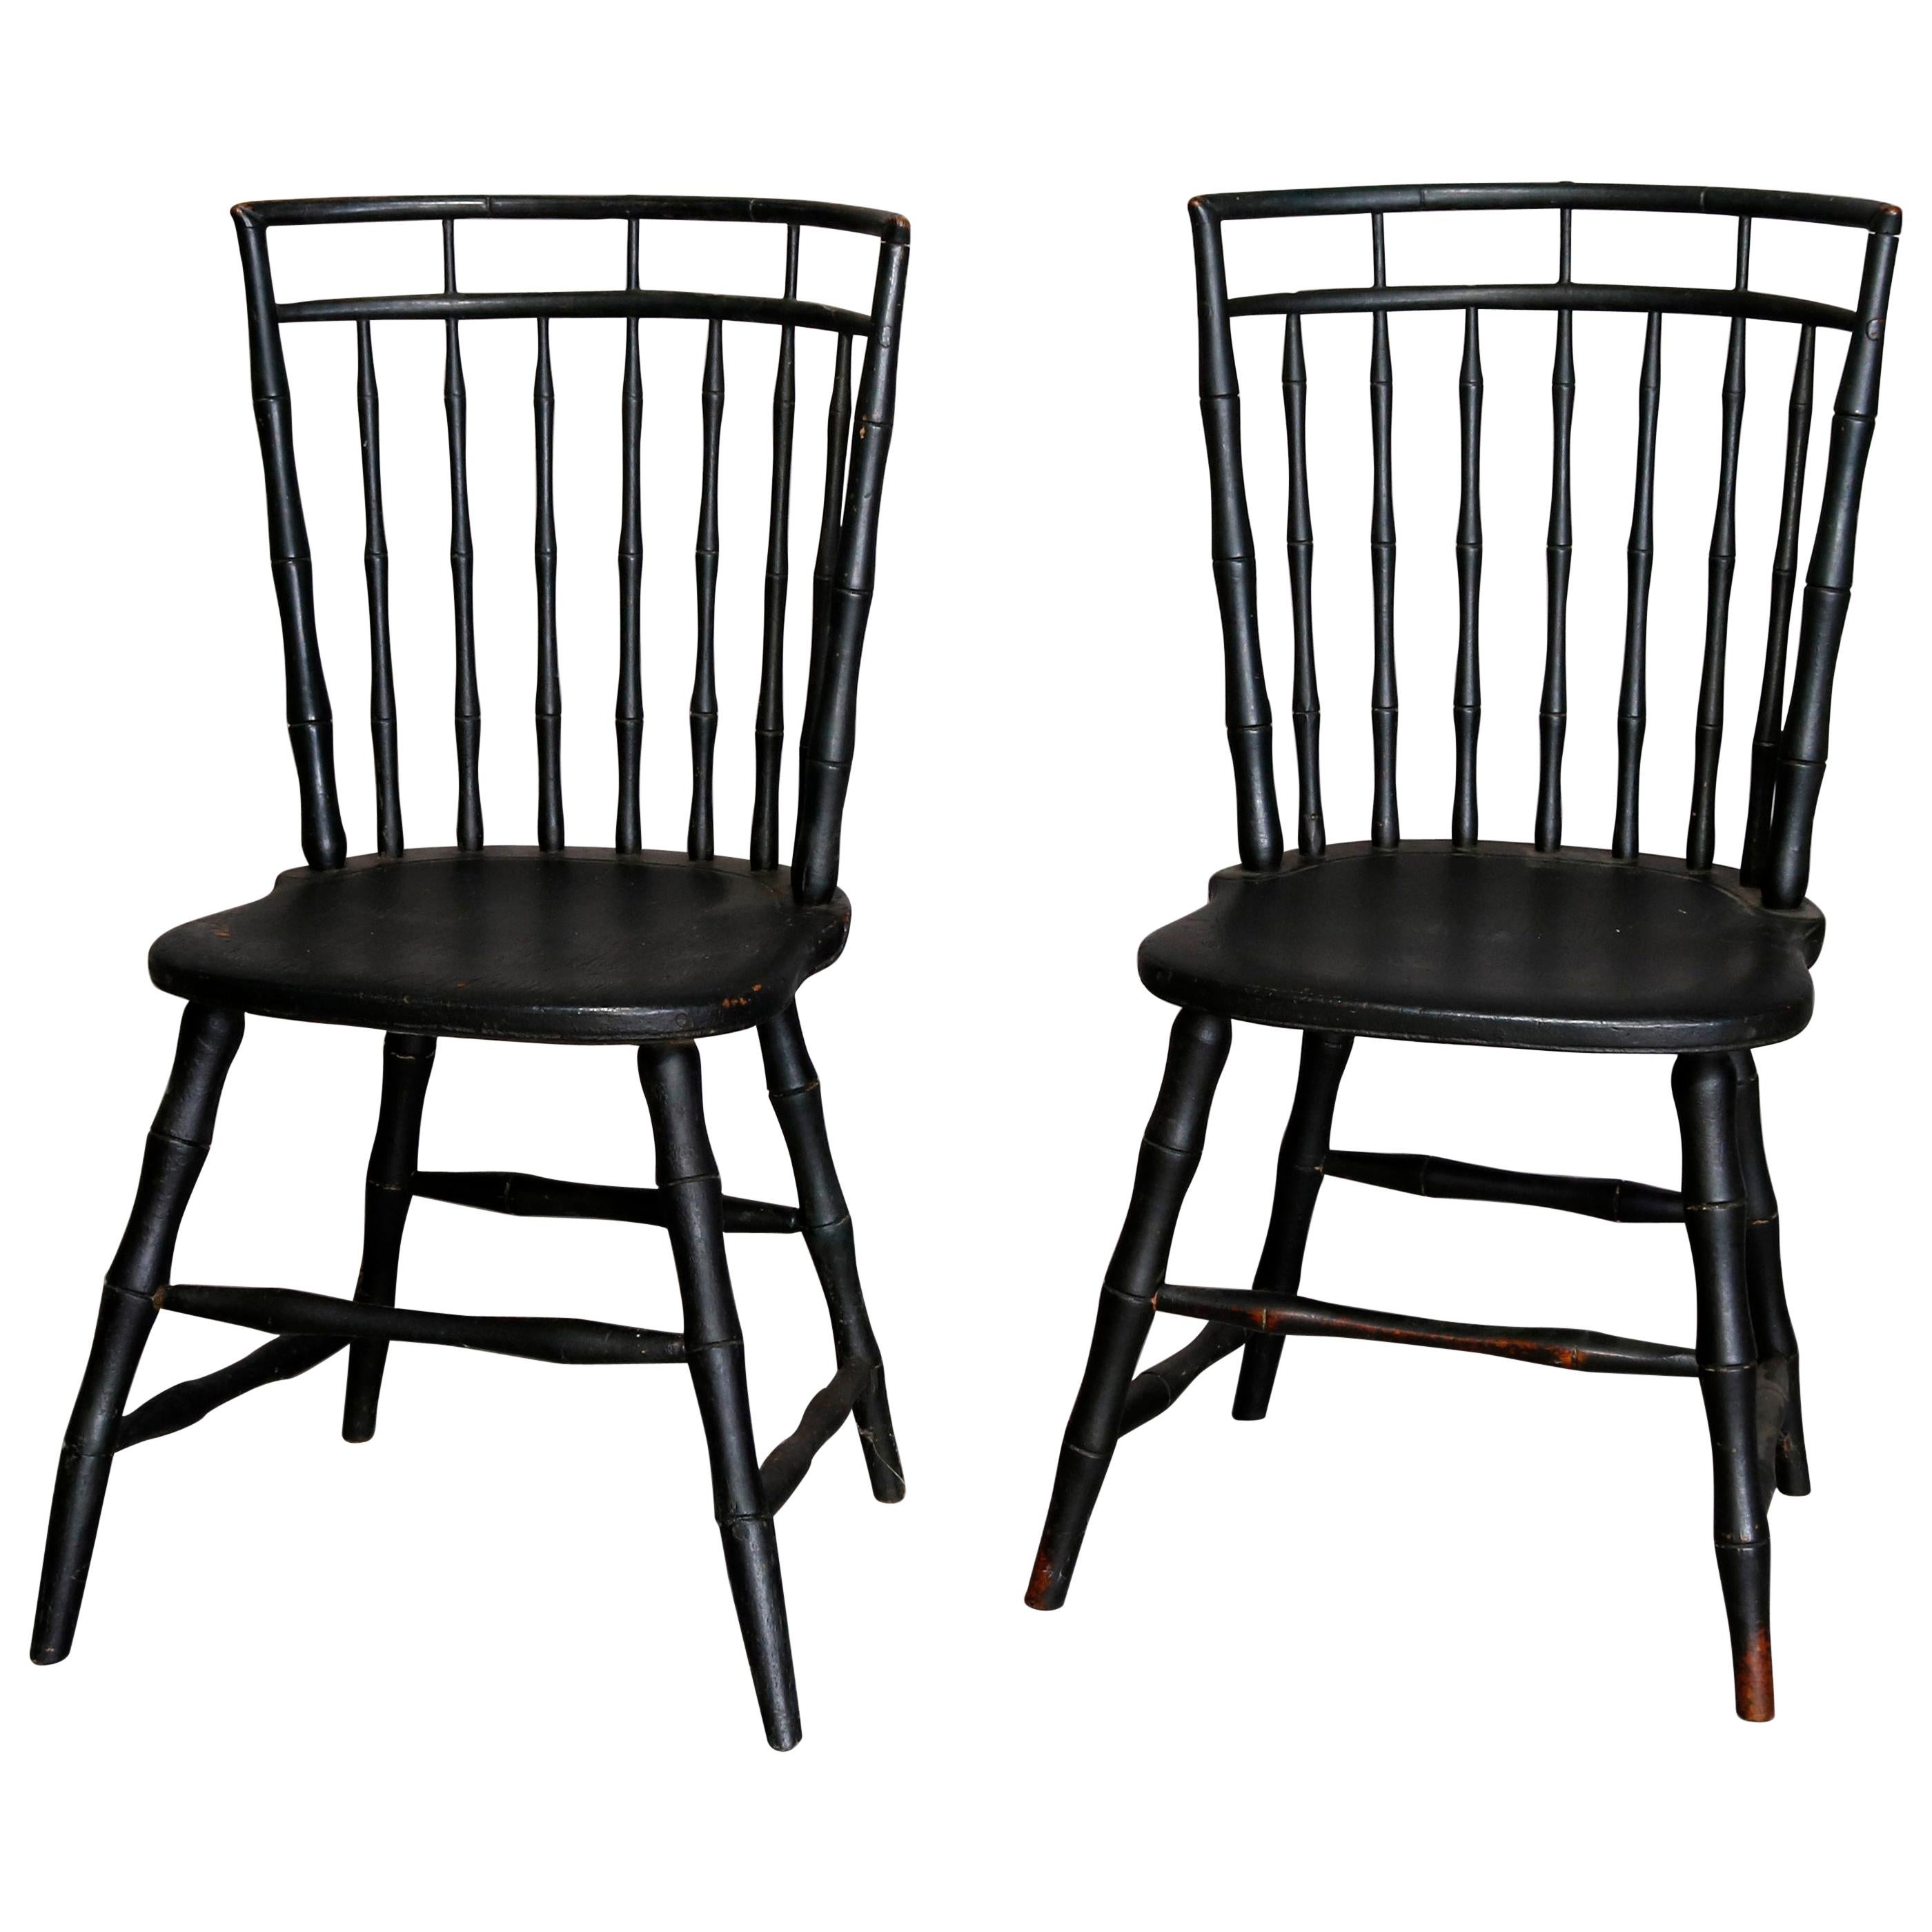 Pair of 18th Century Colonial Ebonized James Chapman Tuttle Windsor Chairs